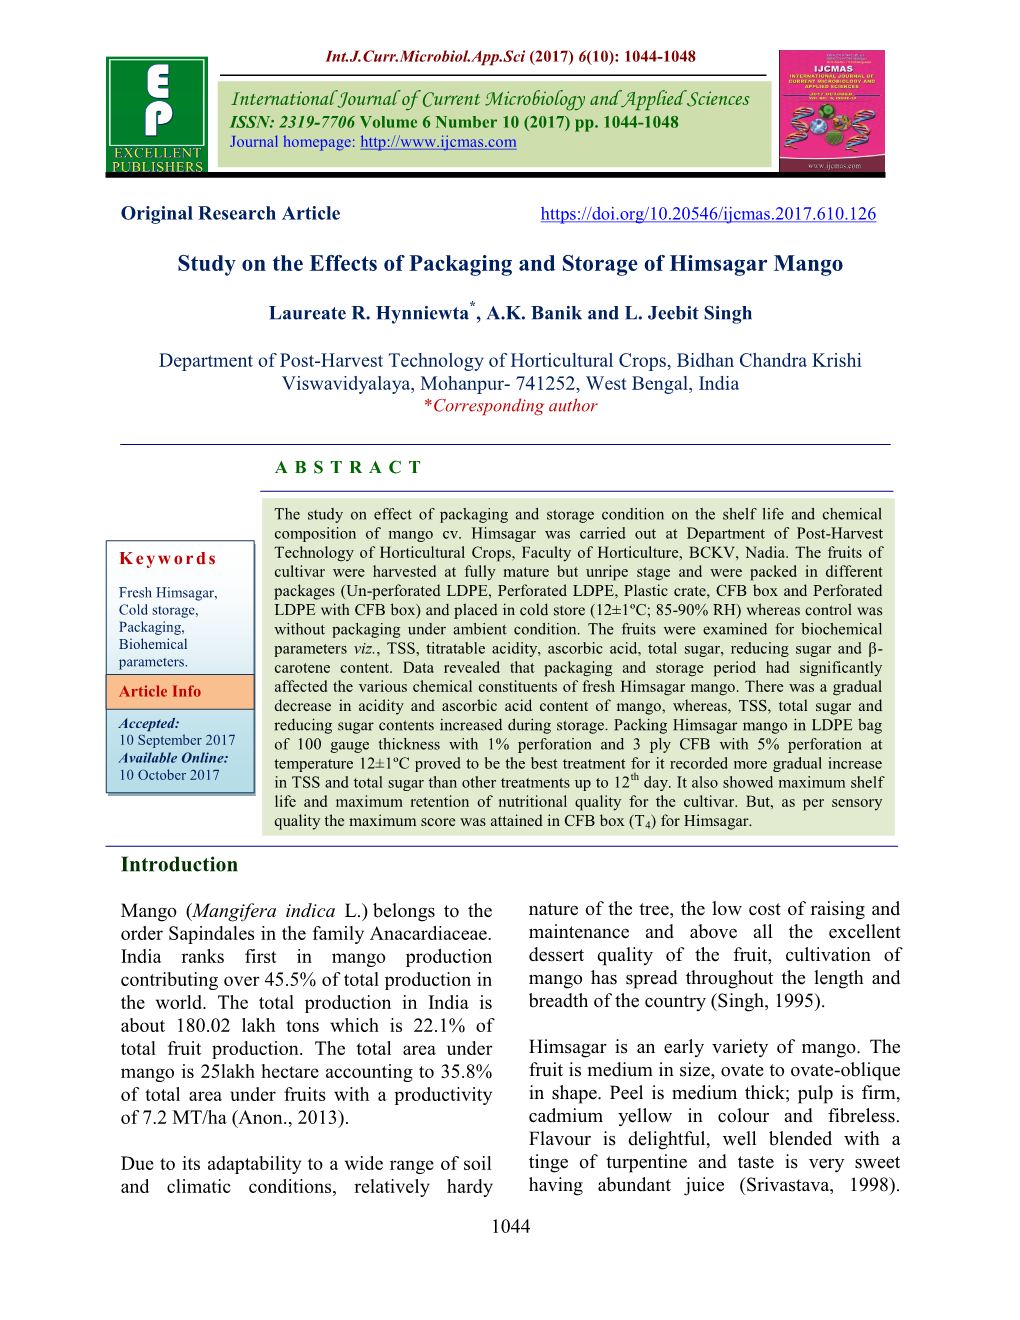 Study on the Effects of Packaging and Storage of Himsagar Mango